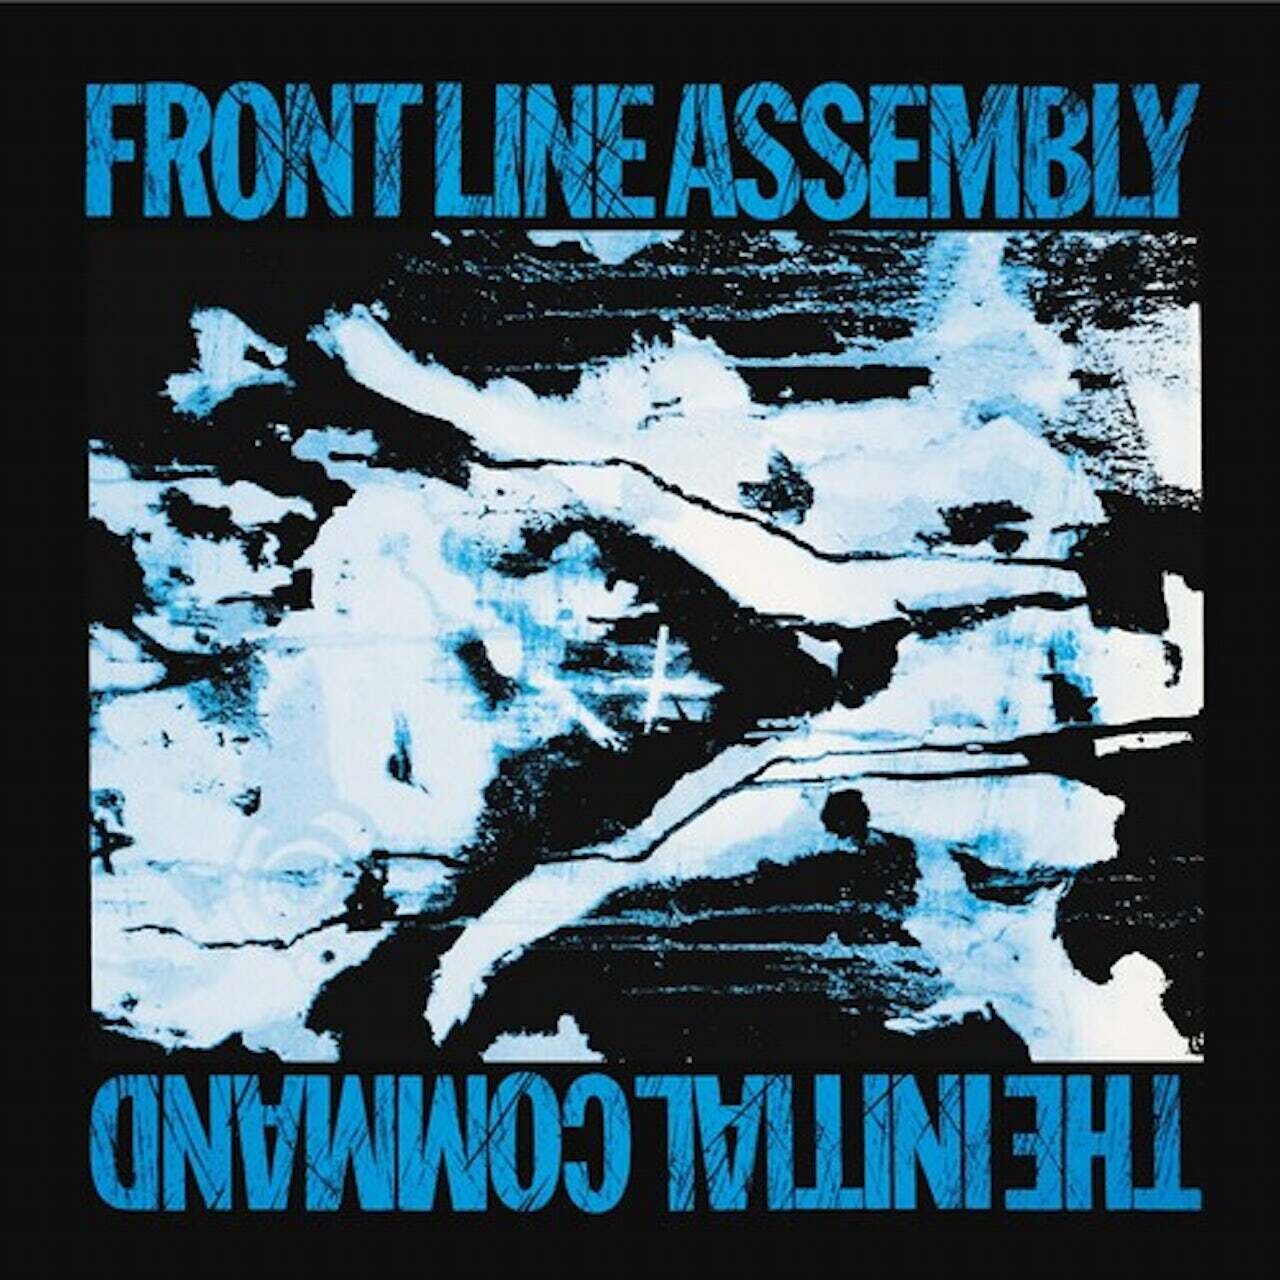 Front Line Assembly / Initial Command - Haze